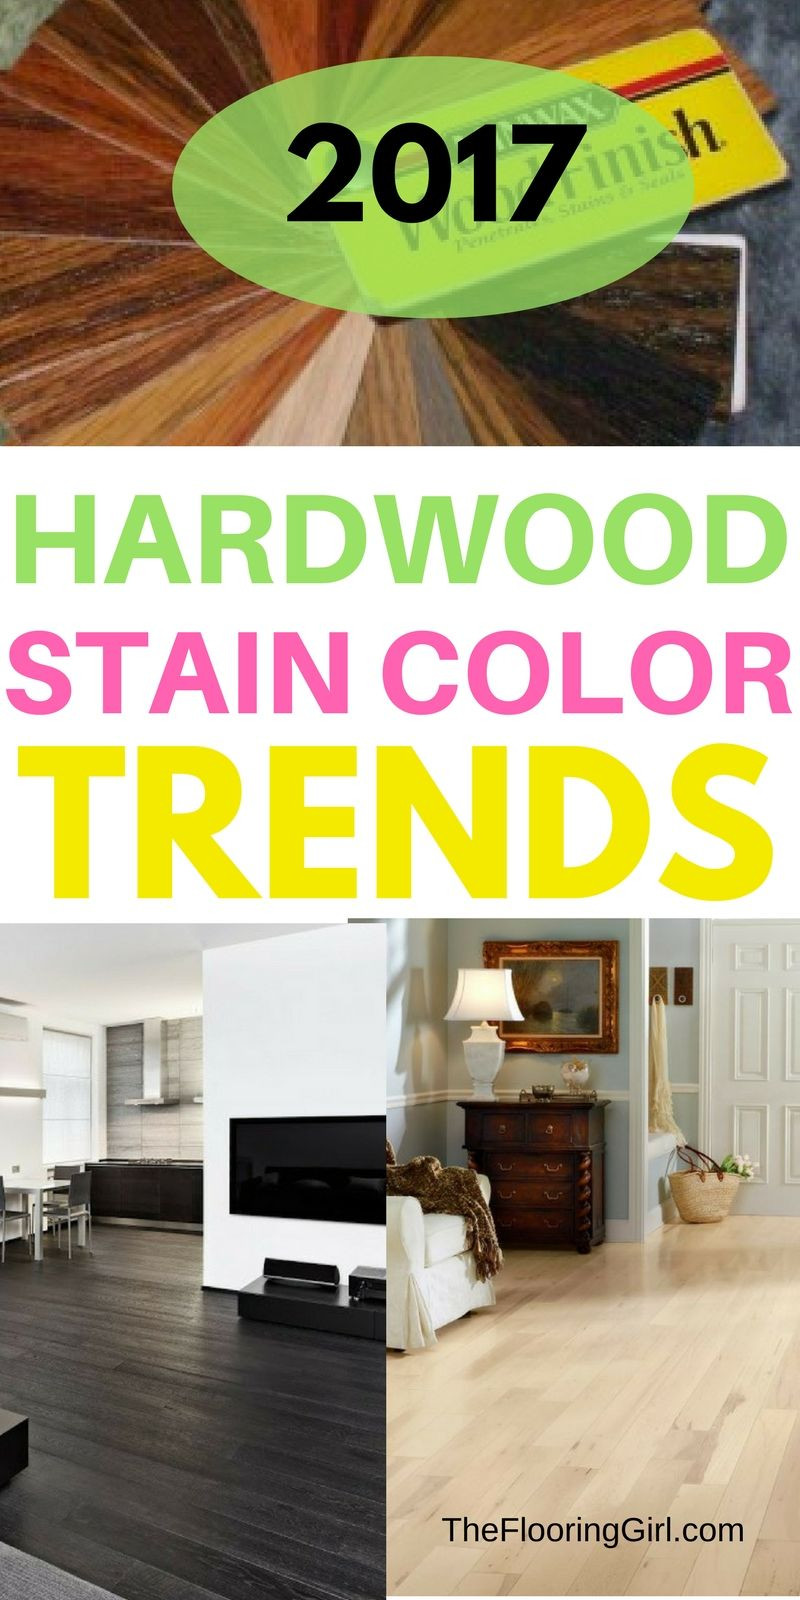 19 Ideal Pet Friendly Hardwood Floors 2024 free download pet friendly hardwood floors of hardwood flooring stain color trends 2018 more from the flooring for hardwood flooring stain color trends for 2017 hardwood colors that are in style thefloori